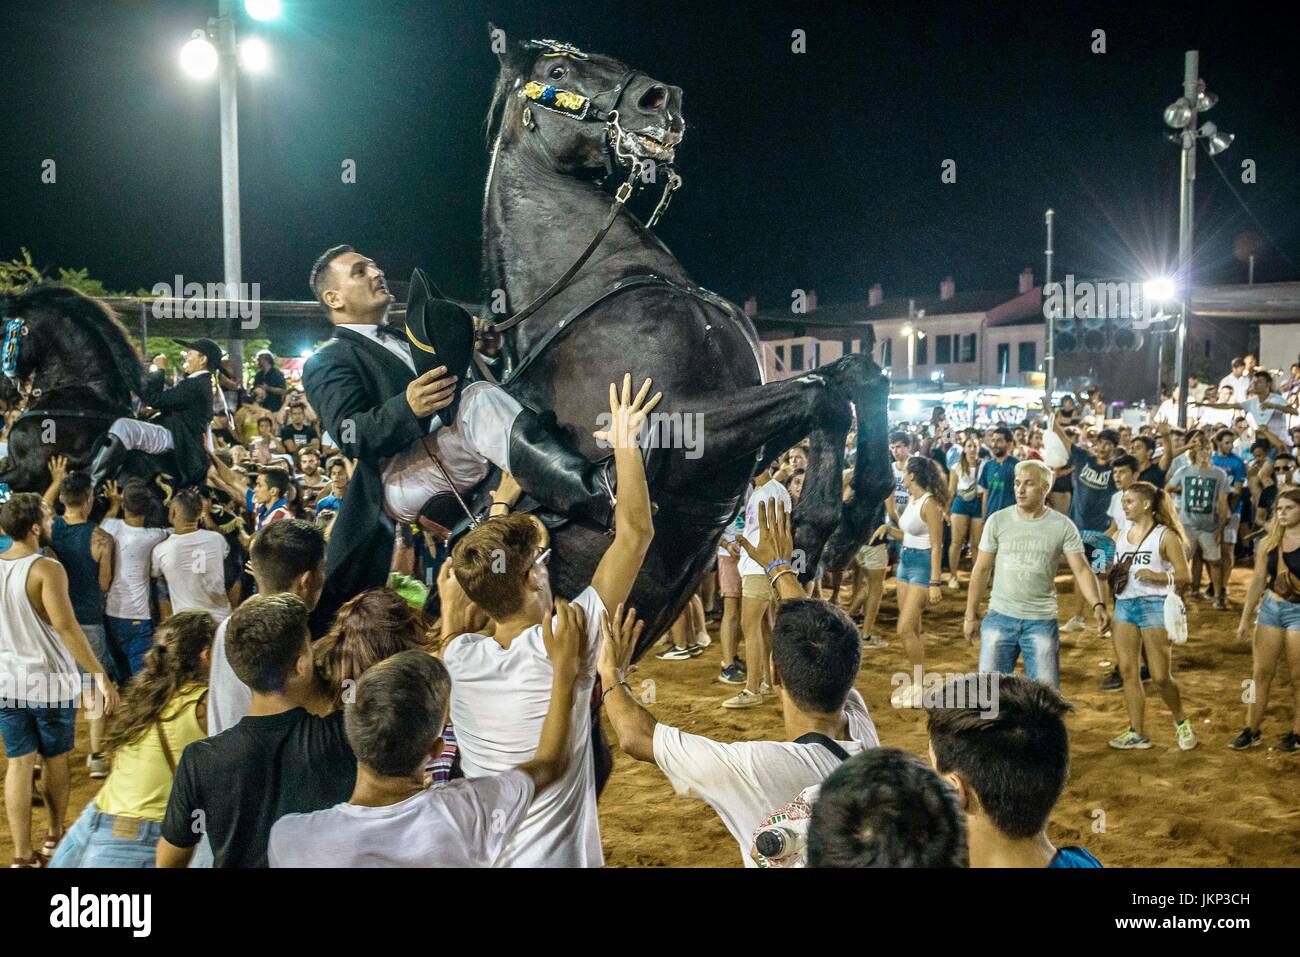 Es Castell, Spain. 24 July, 2017:  A 'caixer' (horse rider) rears up on his horse surrounded by a cheering crowd during the 'Jaleo' of the traditional 'Sant Jaume' (Saint James) festival in Es Castell, the town's patron saint fiesta Credit: Matthias Oesterle/Alamy Live News Stock Photo